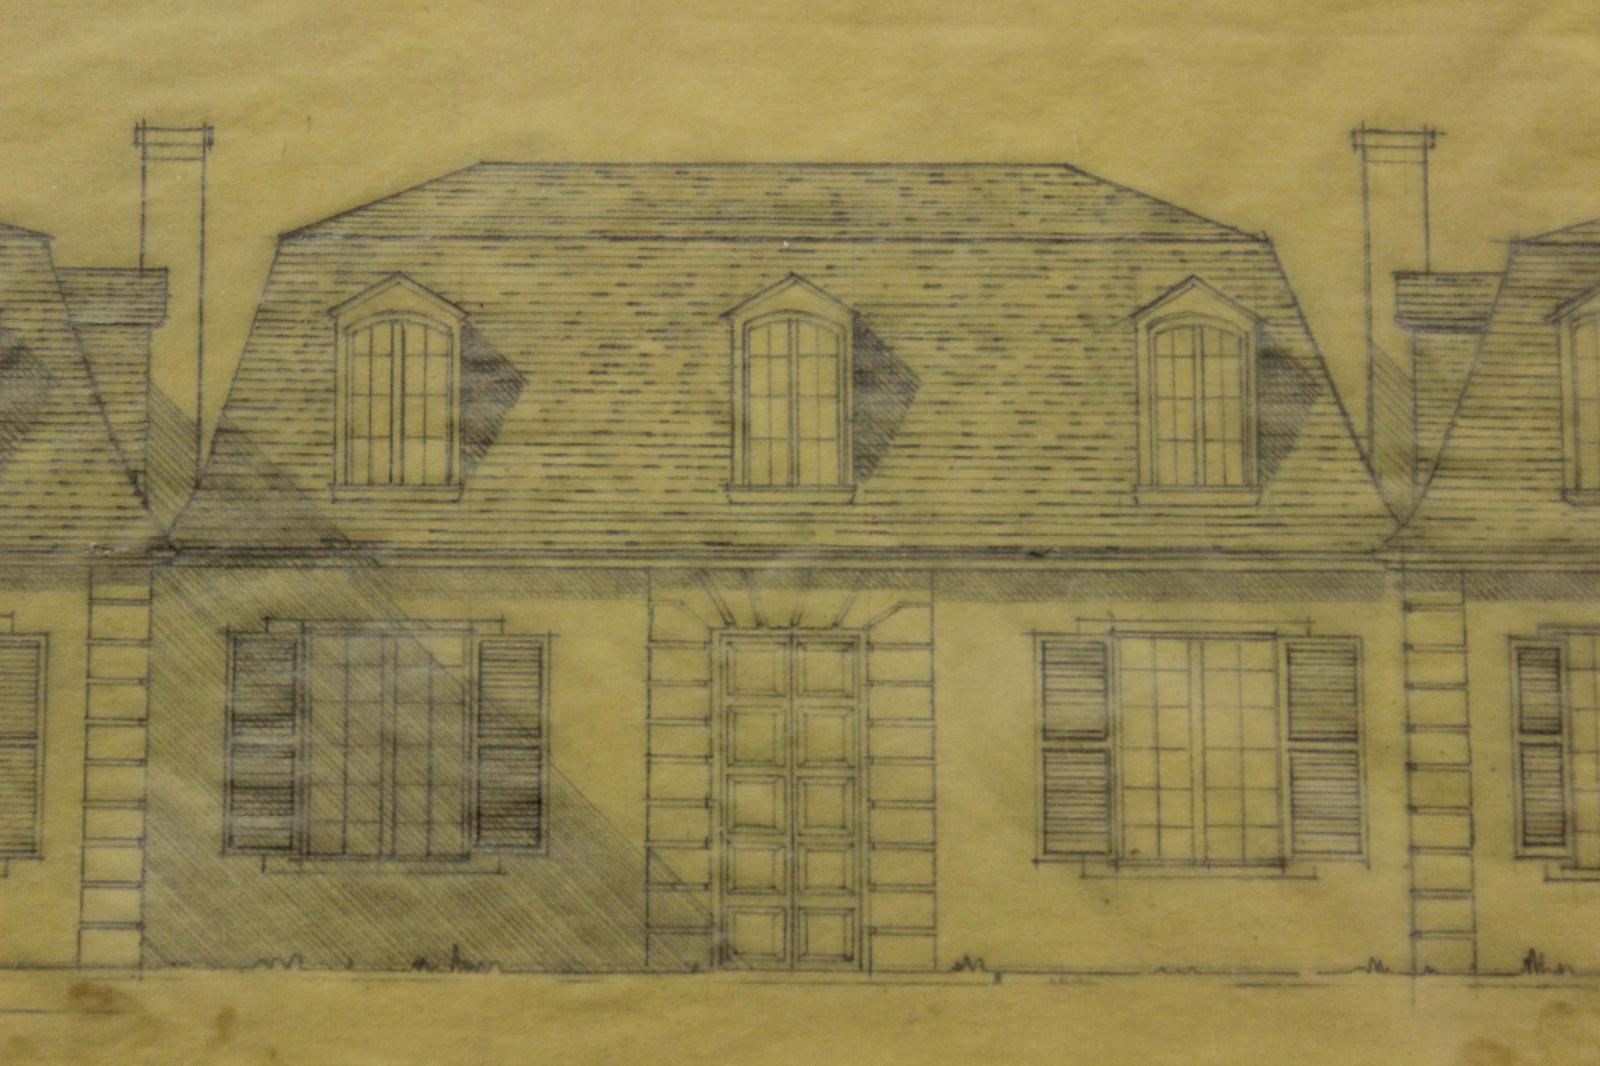 Architectural rendering on parchment paper depicting an imposing French style residence

Drawing Sz: 4 1/4